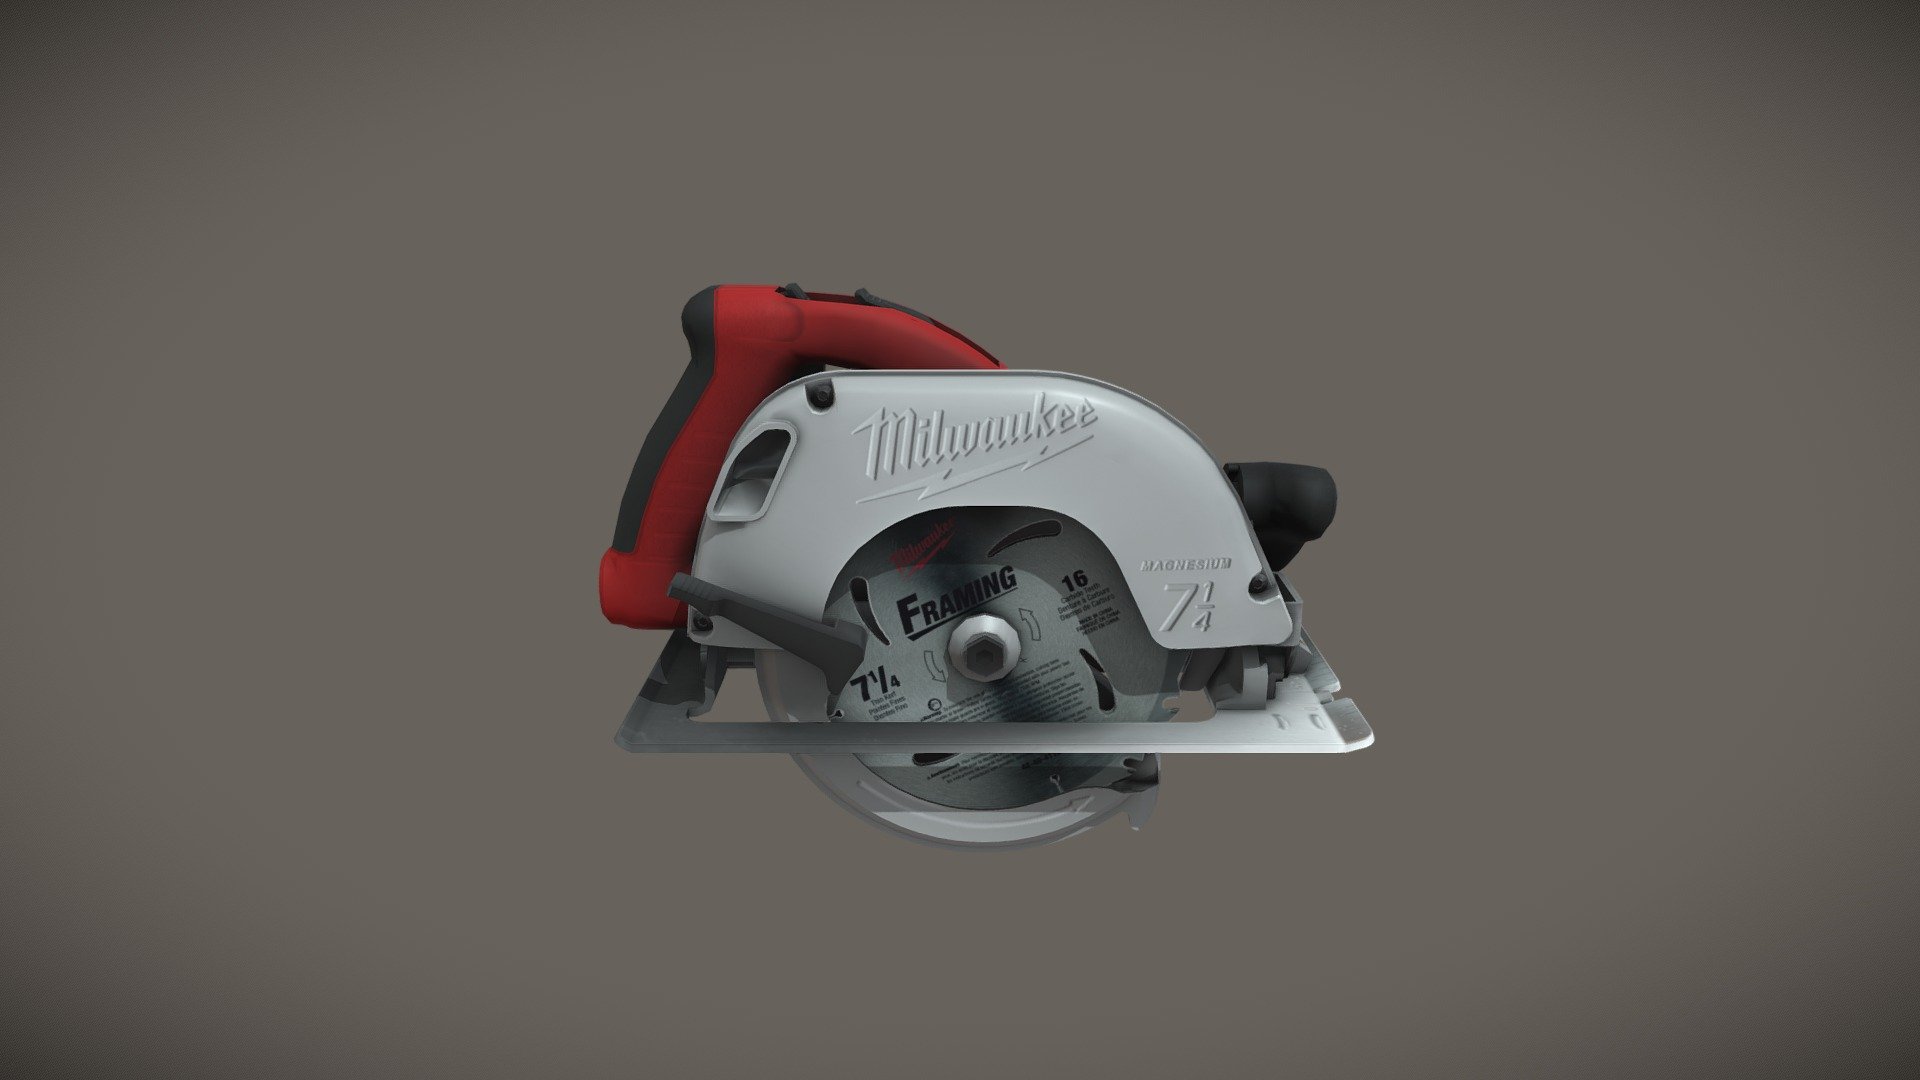 Circular saw power tool model made for a real time tool browser application 3d model